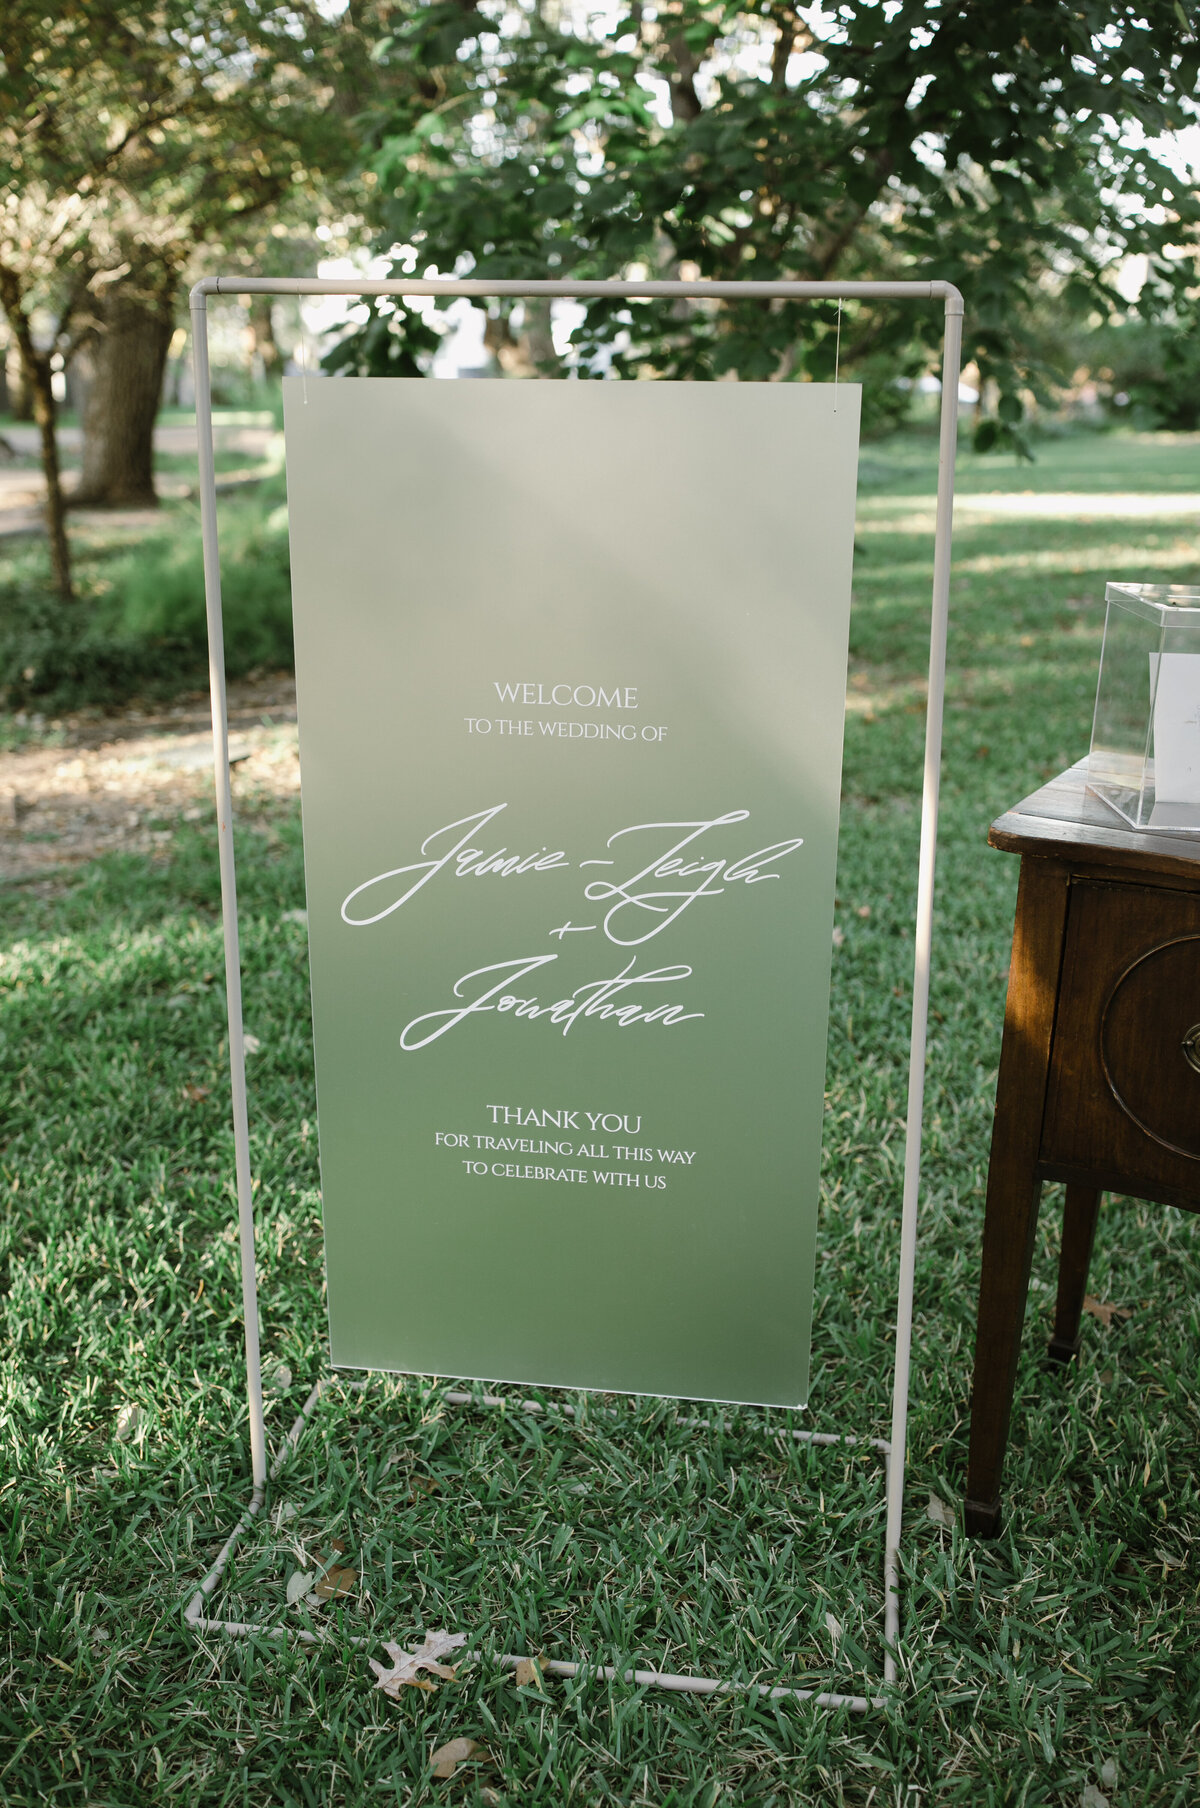 LBV Design House Wedding Design Planning Day-Of Signage Paper Goods Shoppable Accessories Wedding Day Austin, Texas beyond Valerie Strenk Lettered by Valerie Hand Lettering4